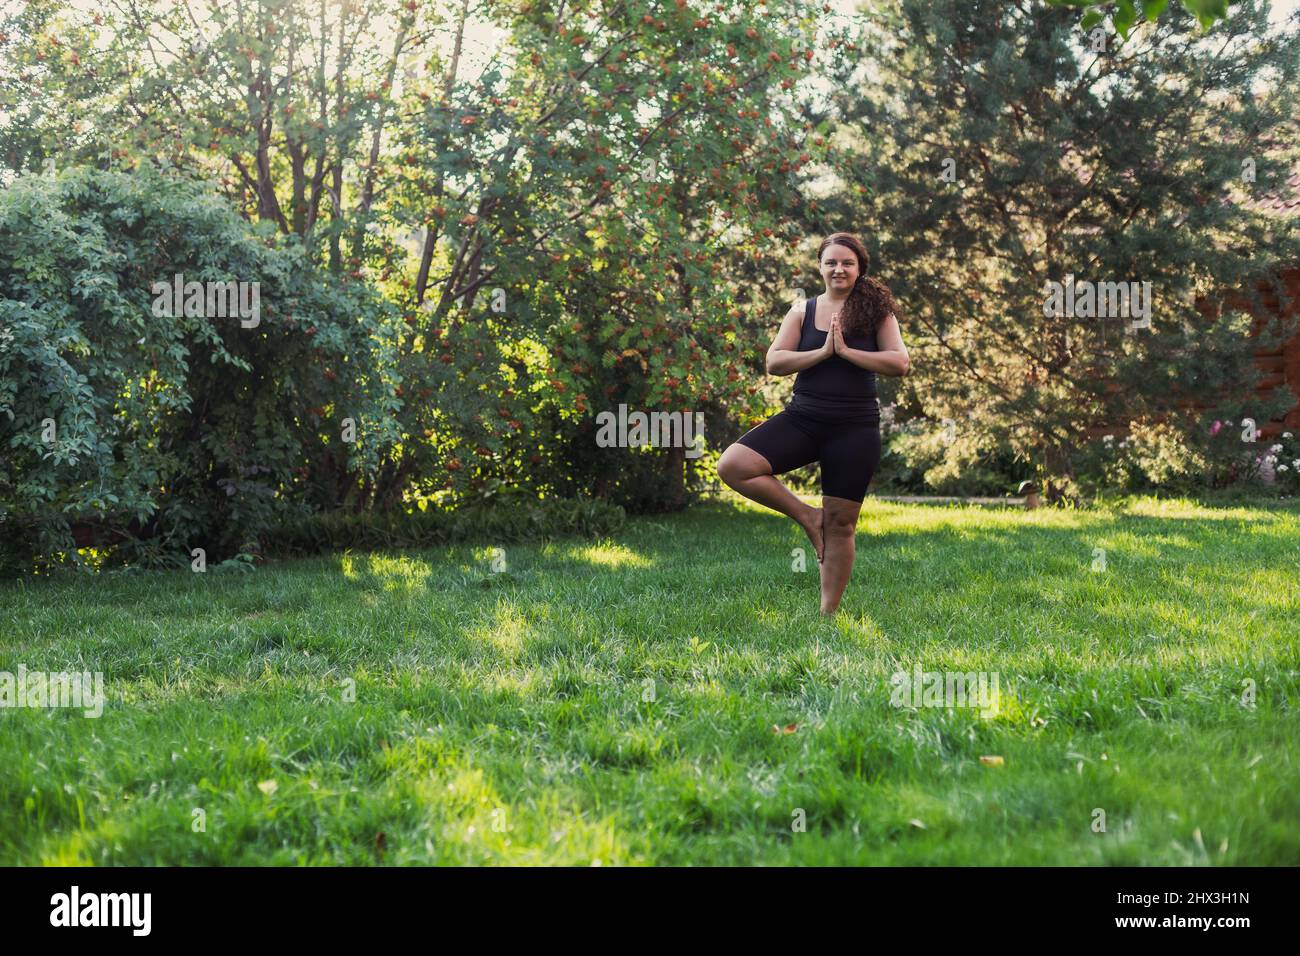 Female with extra weight standing on one foot in yoga position enjoying the moment on green grass on backyard of cottage with wooden house and trees Stock Photo